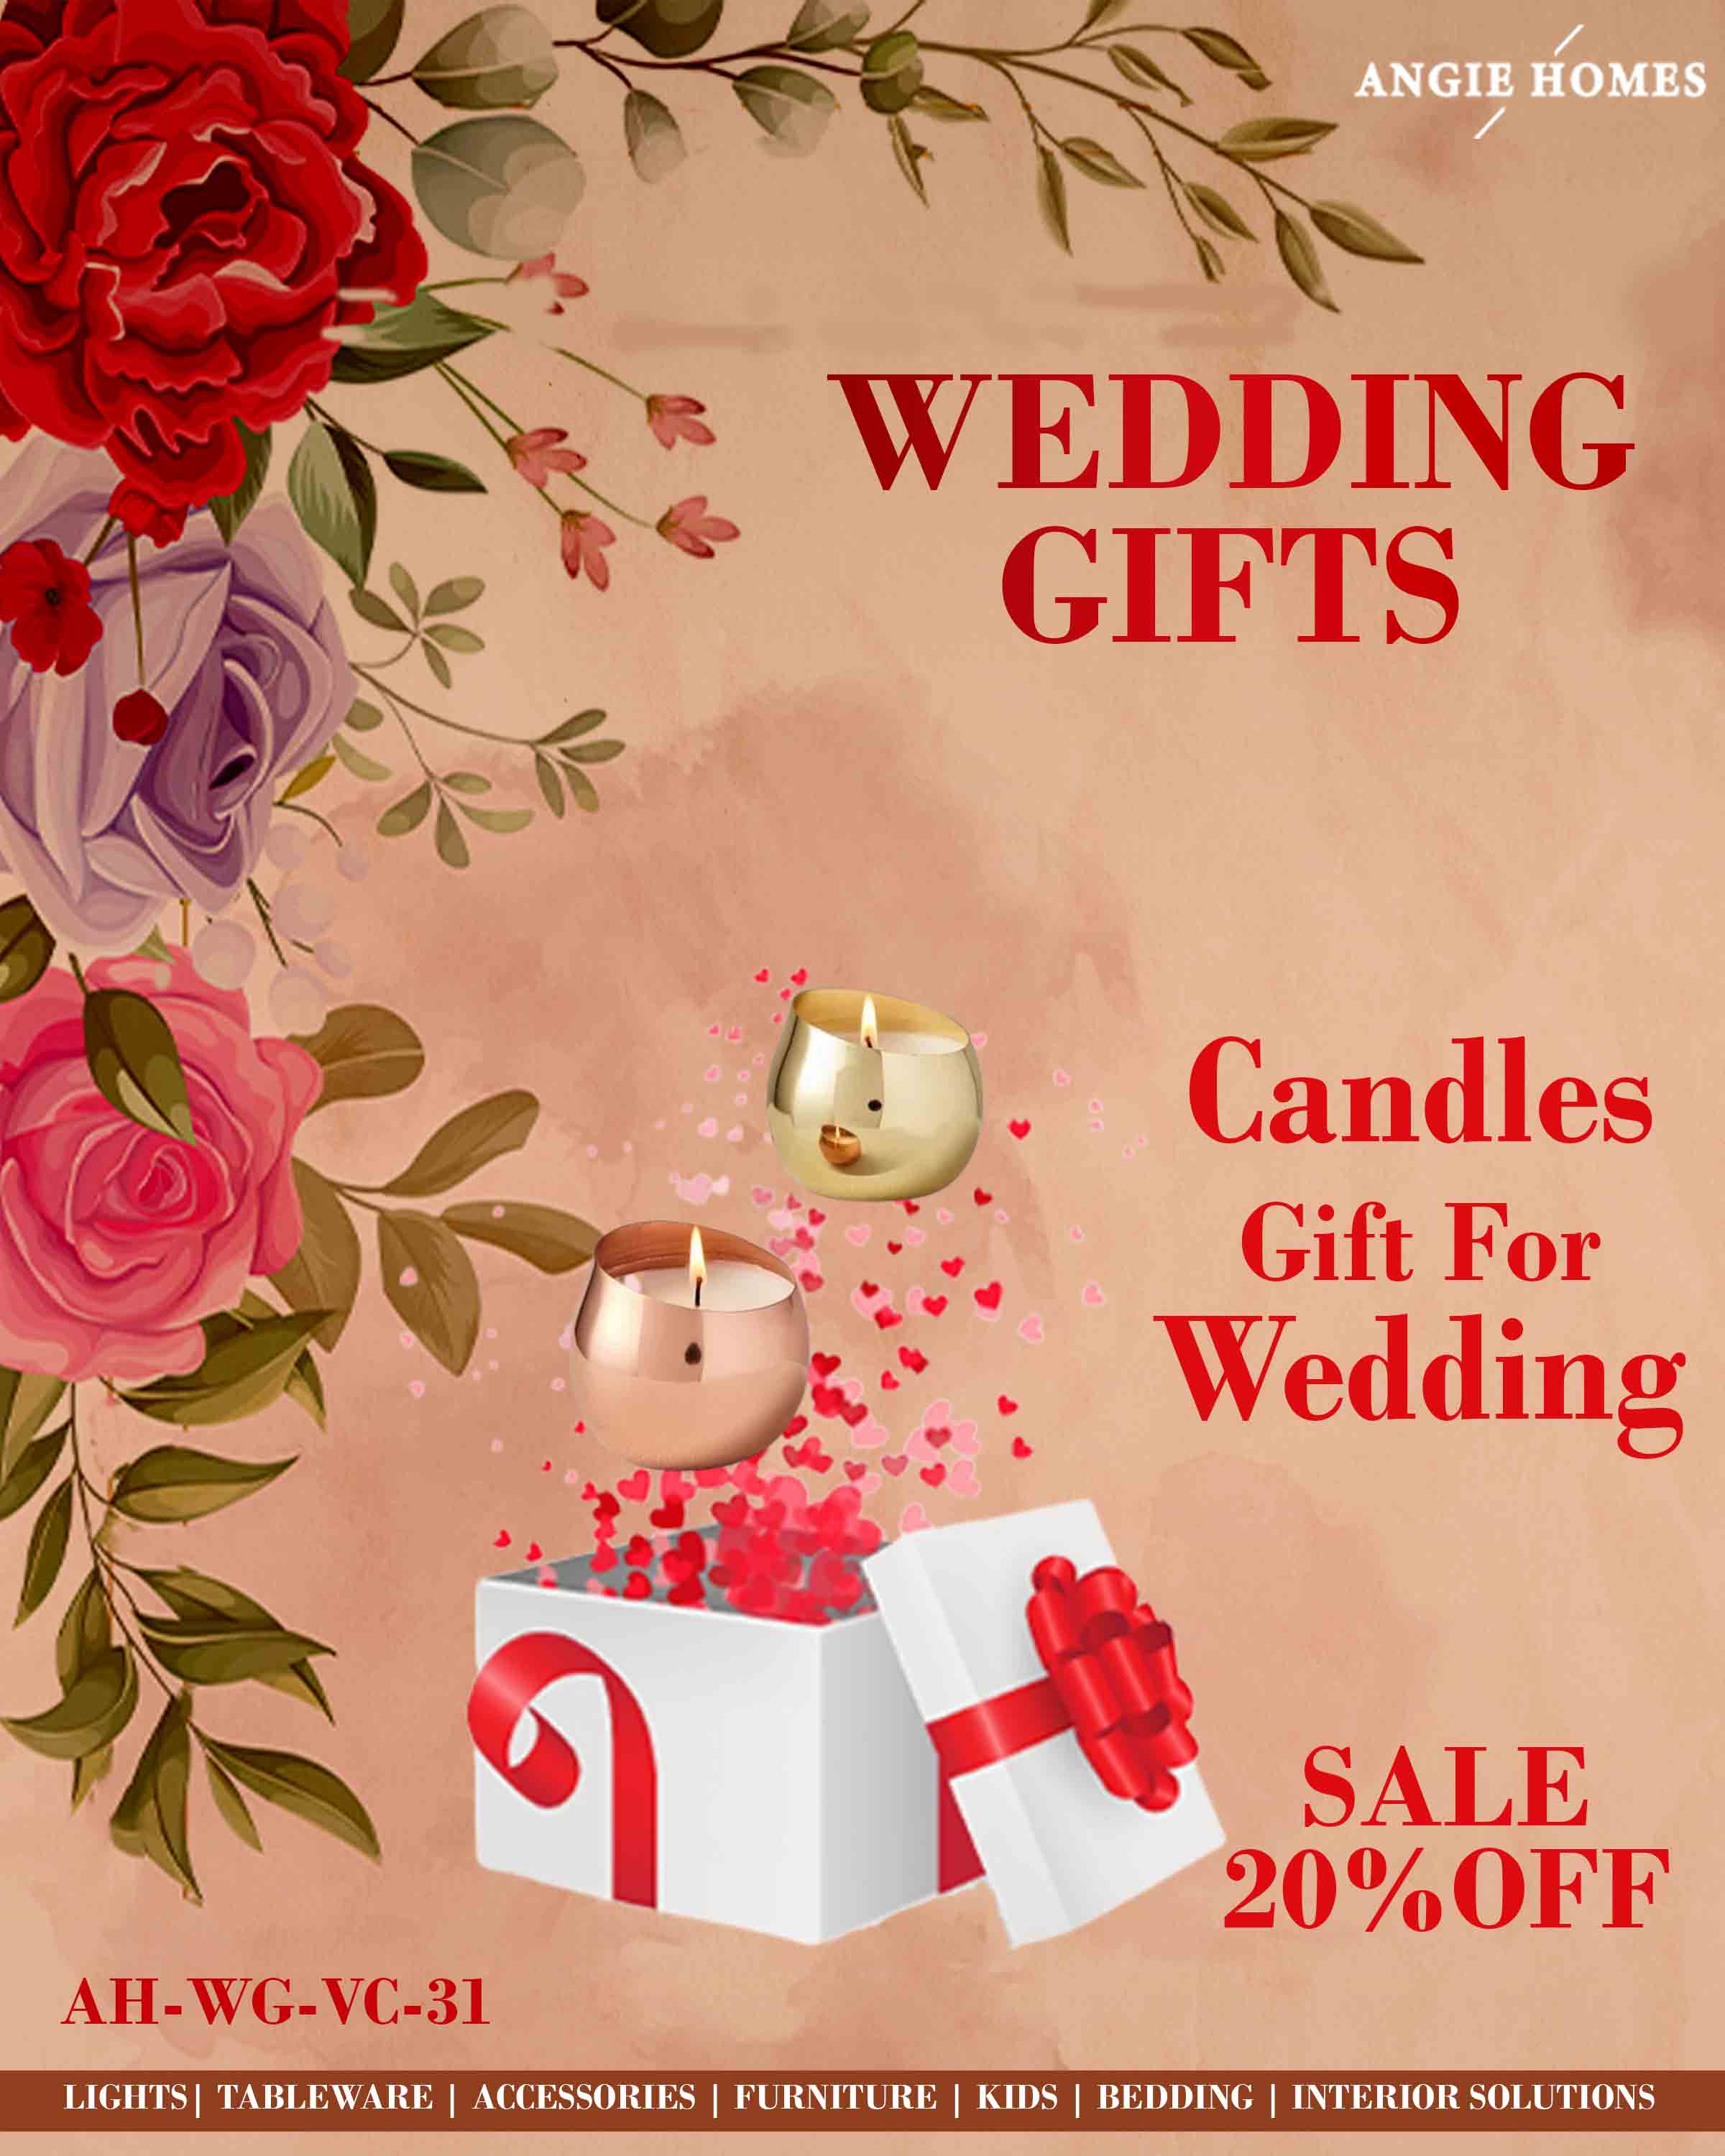 CANDLE FOR WEDDING GIFTS | MARRIAGE GIFT PRESENTS | DESIGNER GIFTING PRODUCTS ANGIE HOMES